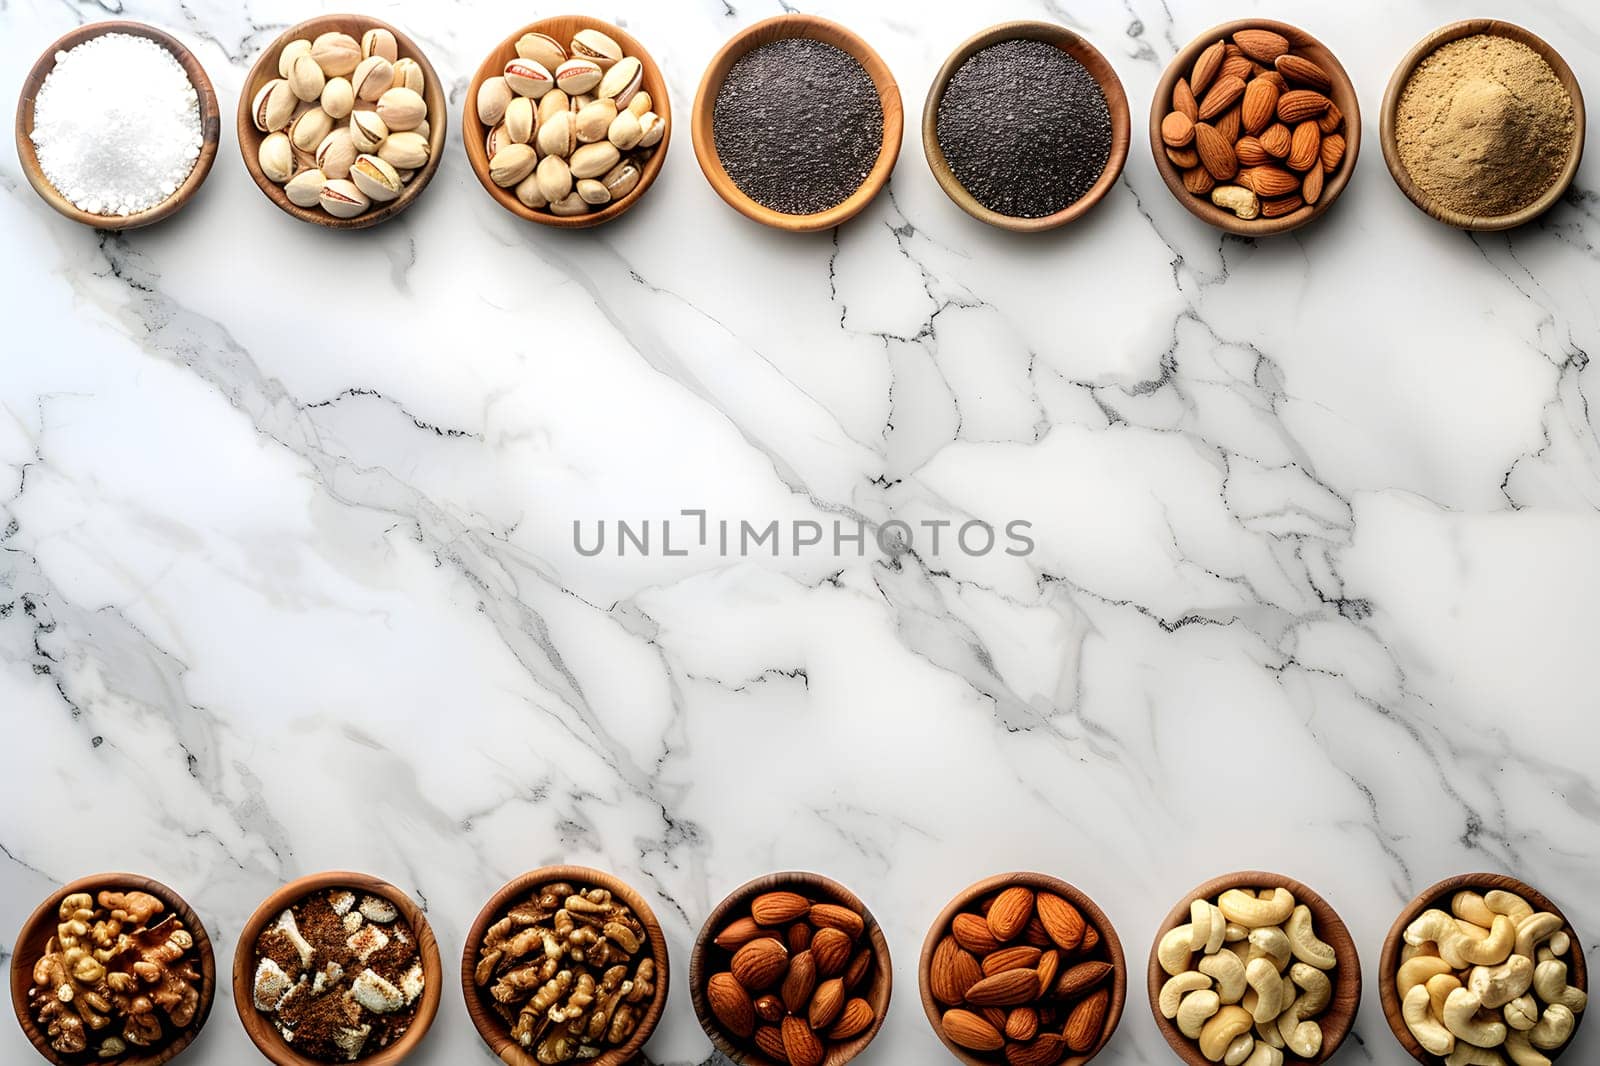 A variety of nuts and spices are displayed in wooden bowls on a luxurious marble surface, creating a stunning contrast of textures and colors